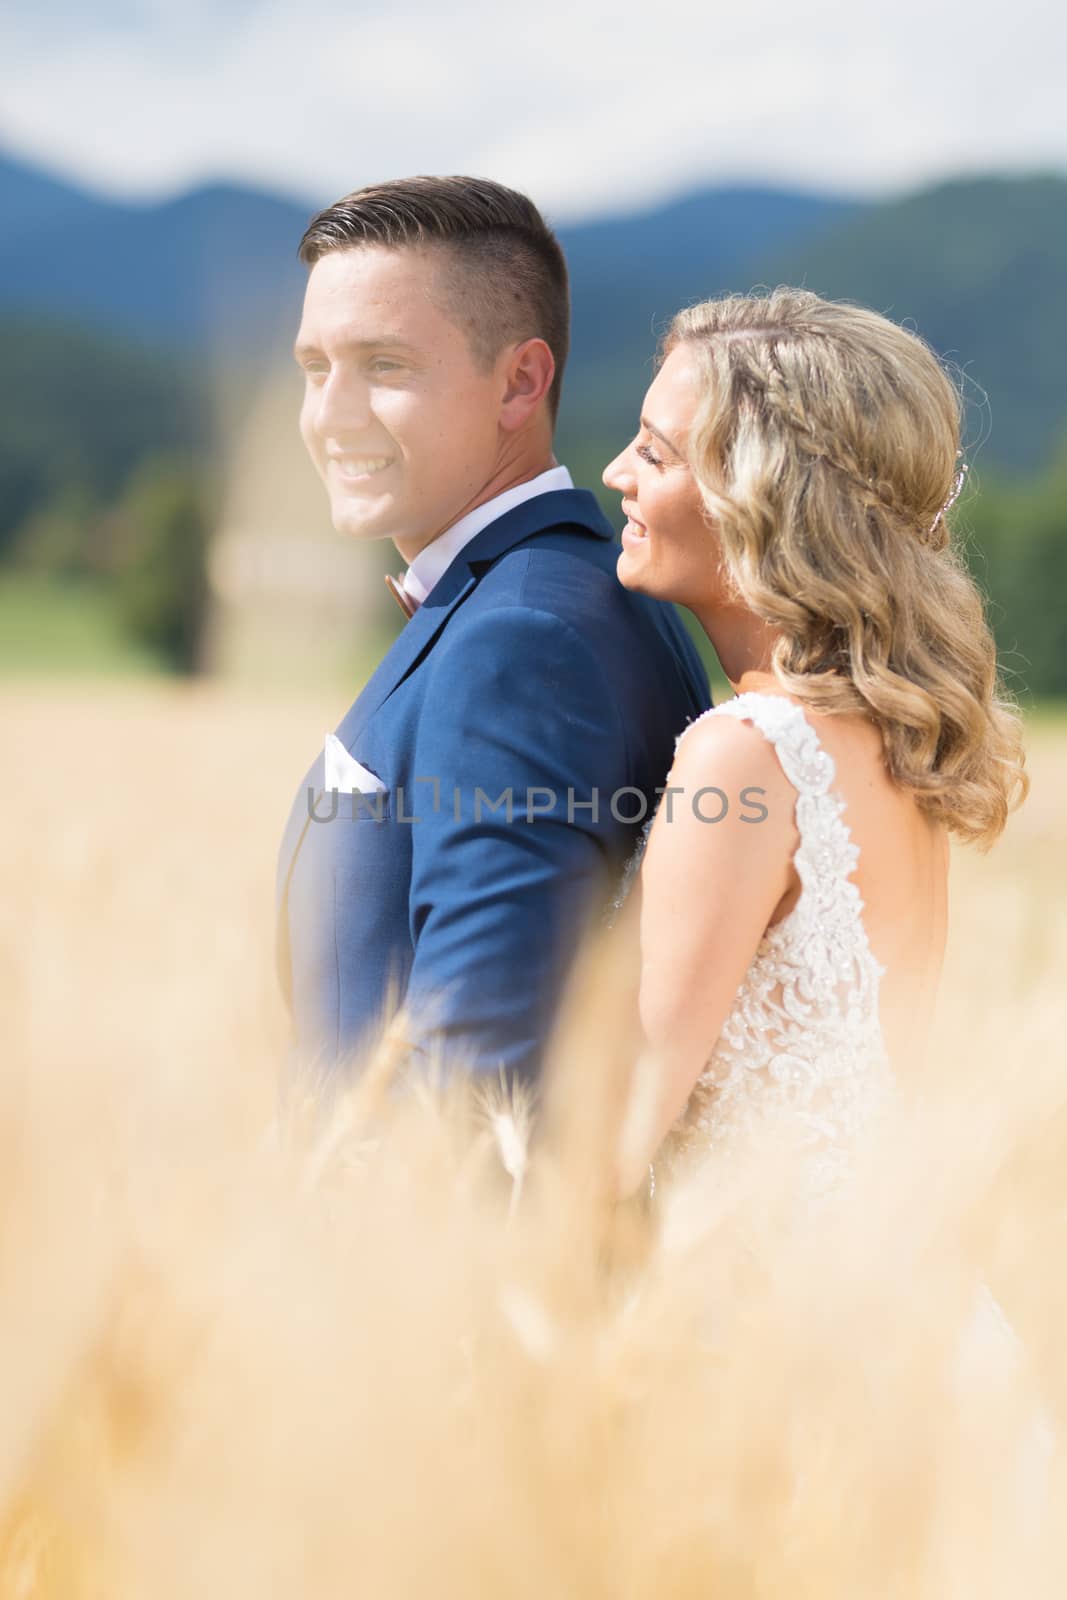 Newlyweds hugging tenderly in wheat field somewhere in Slovenian countryside. Caucasian happy romantic young couple celebrating their marriage.